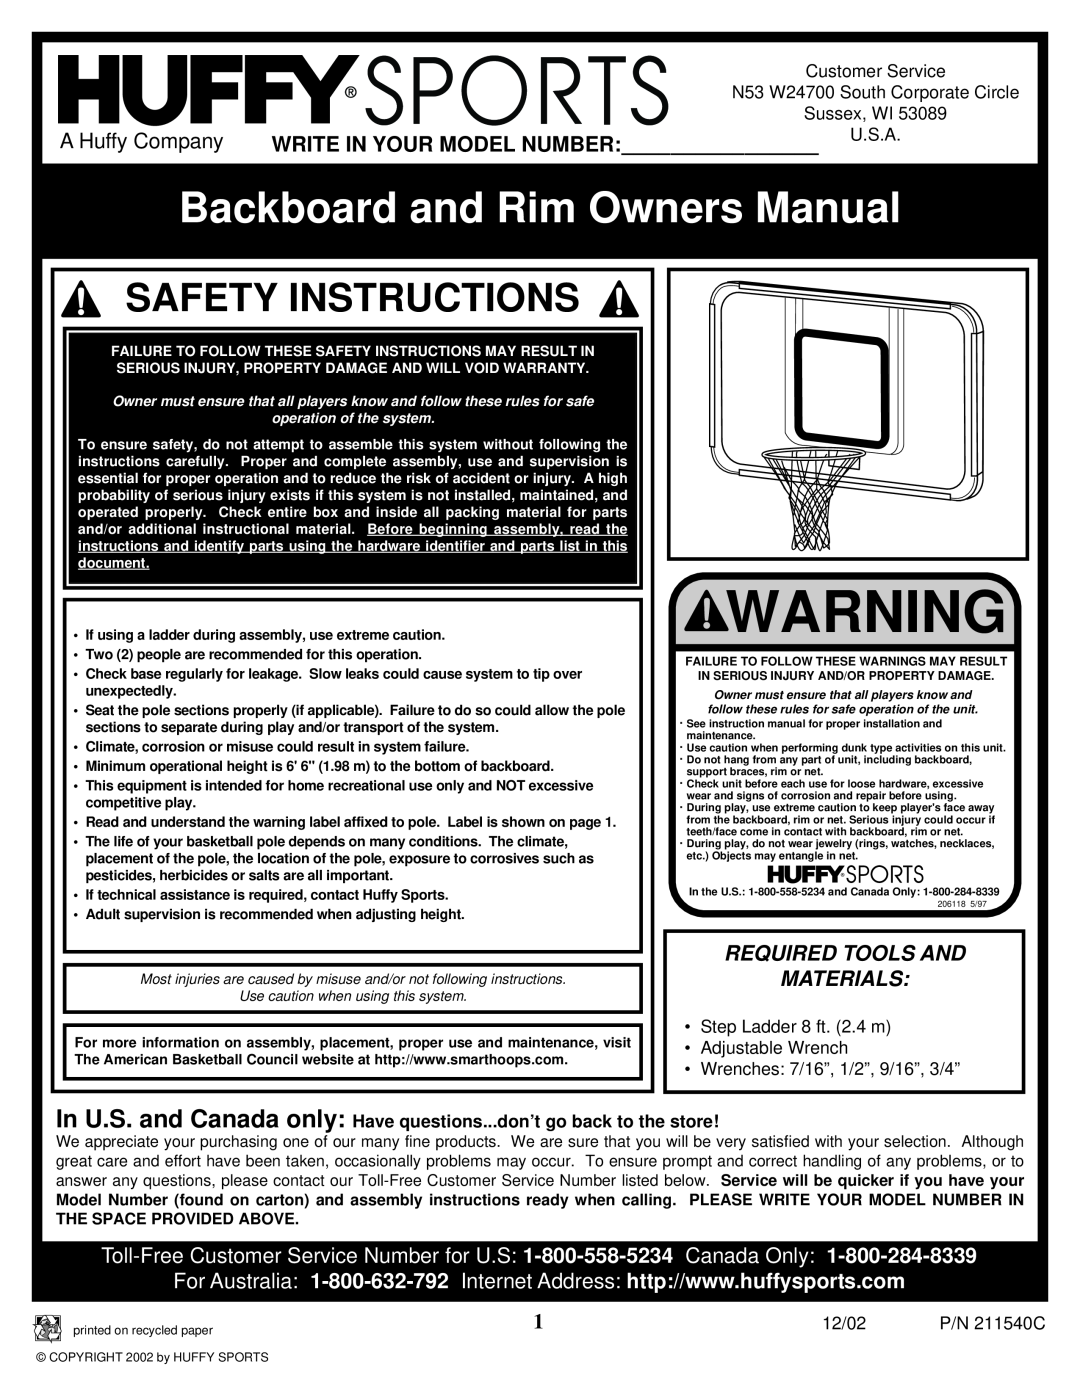 Spalding 211540C manual Backboard and Rim Owners Manual, A Huffy Company, Write In Your Model Number, Safety Instructions 